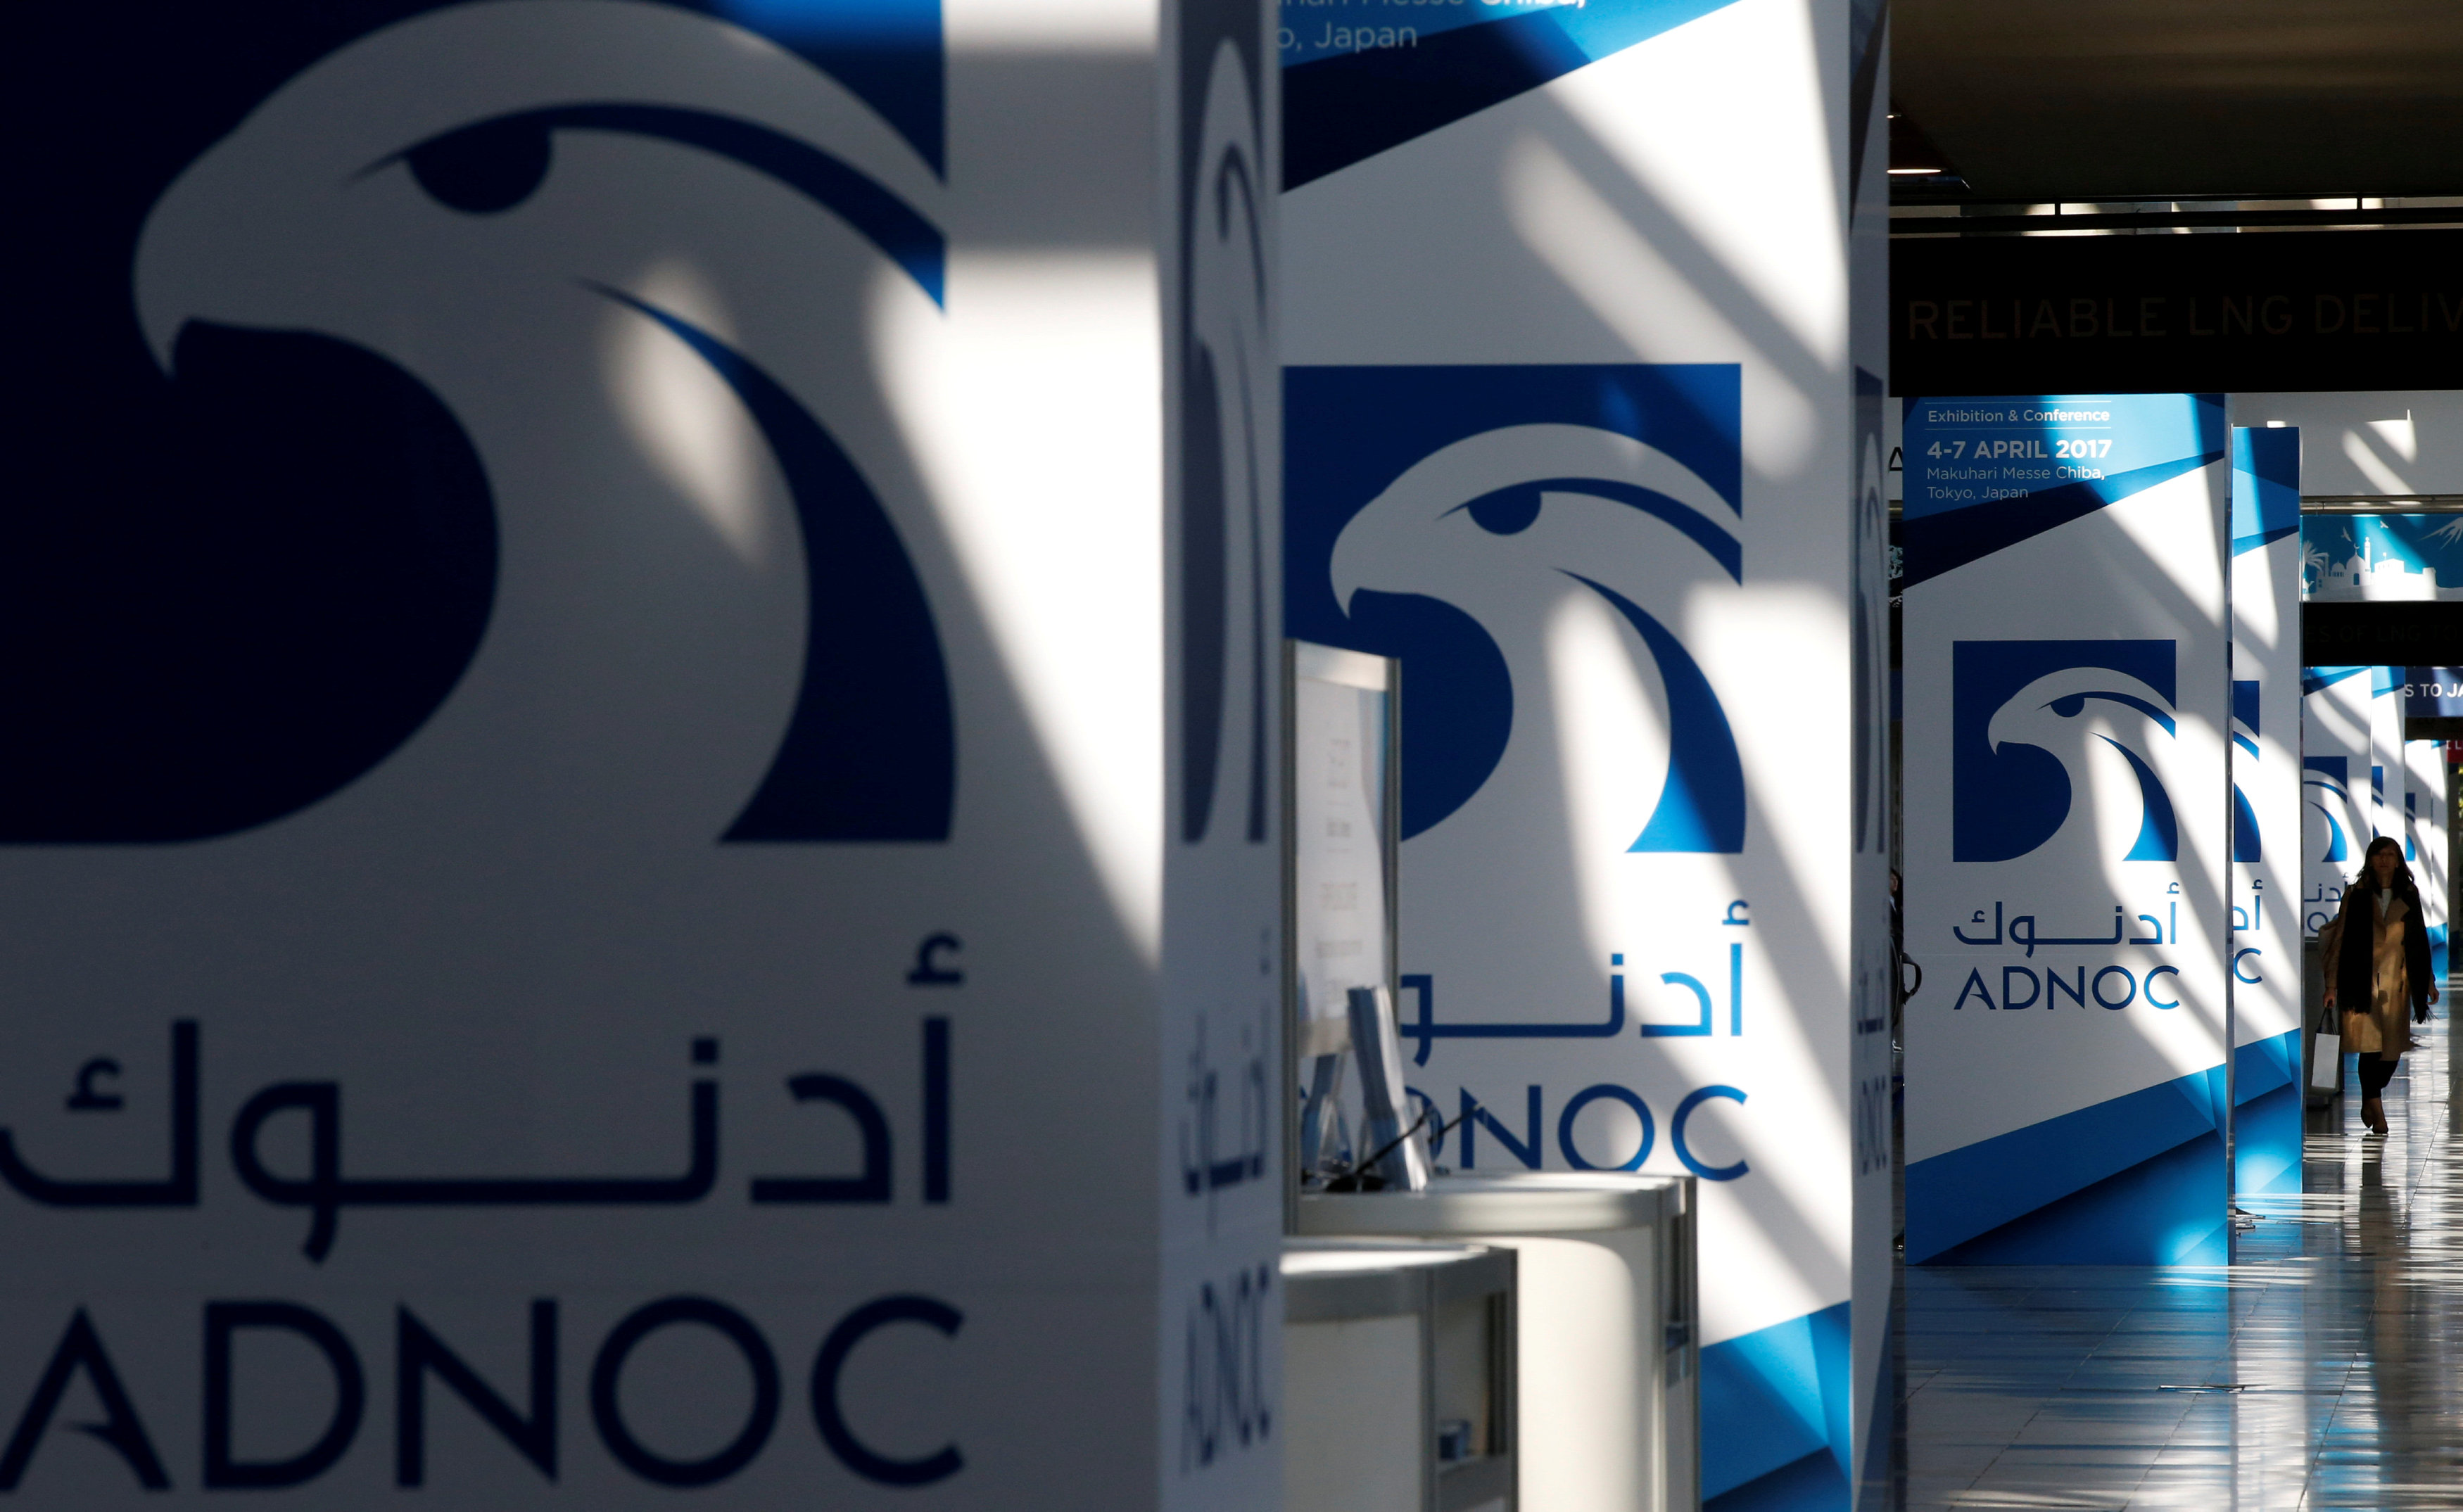 ADNOC sets up oil trading business to help find new markets